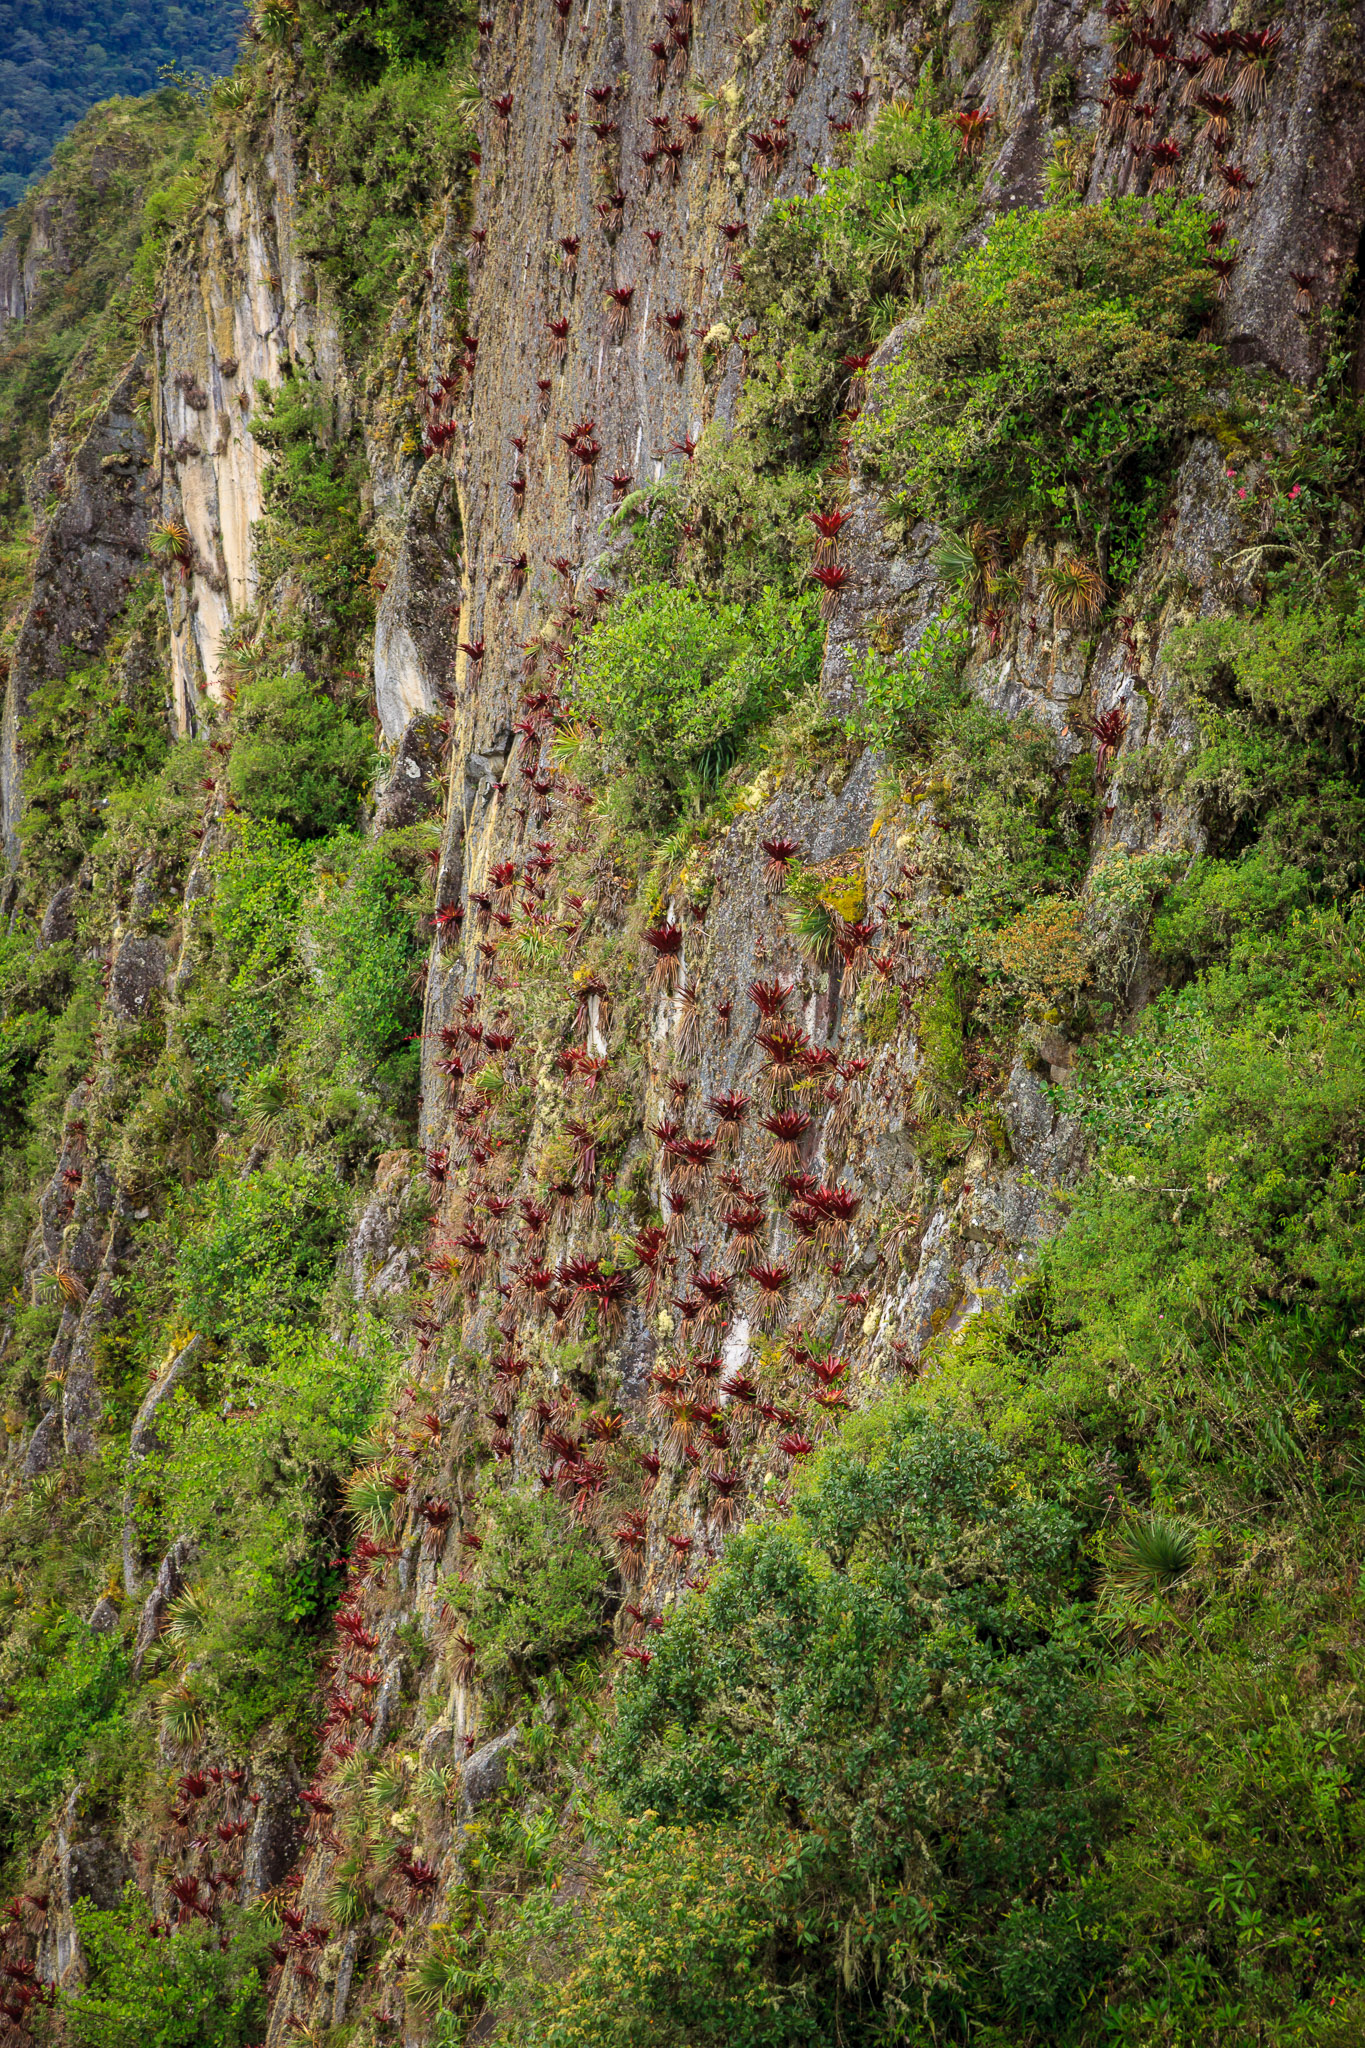 Bromeliad-covered cliffs